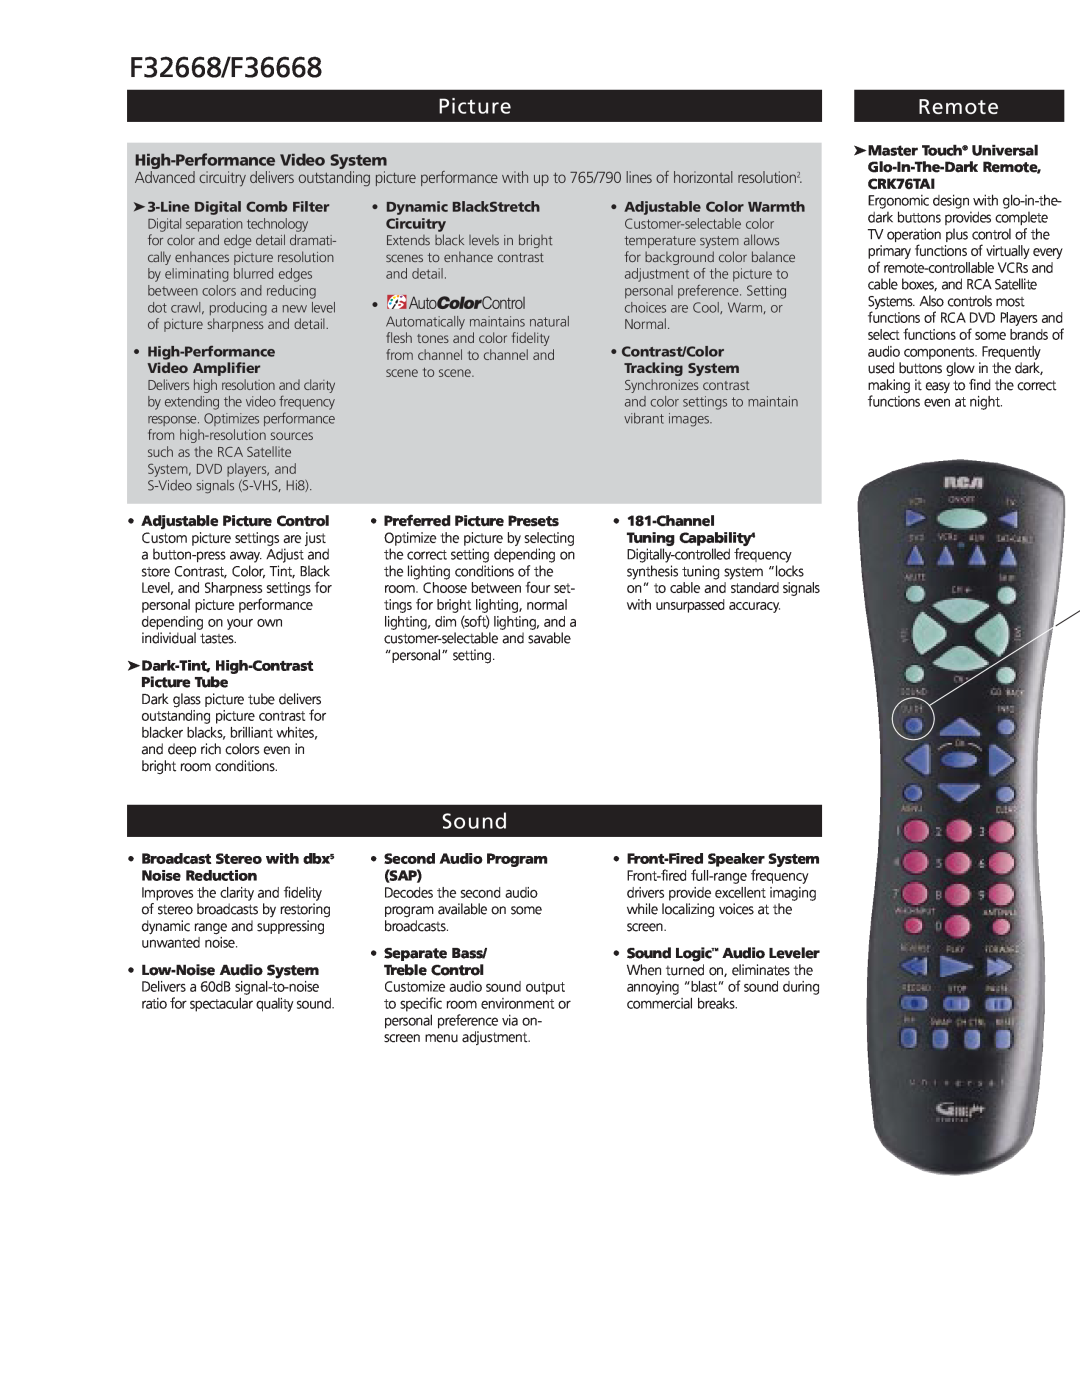 RCA manual Picture, Remote, Sound, F32668/F36668, High-Performance Video System 